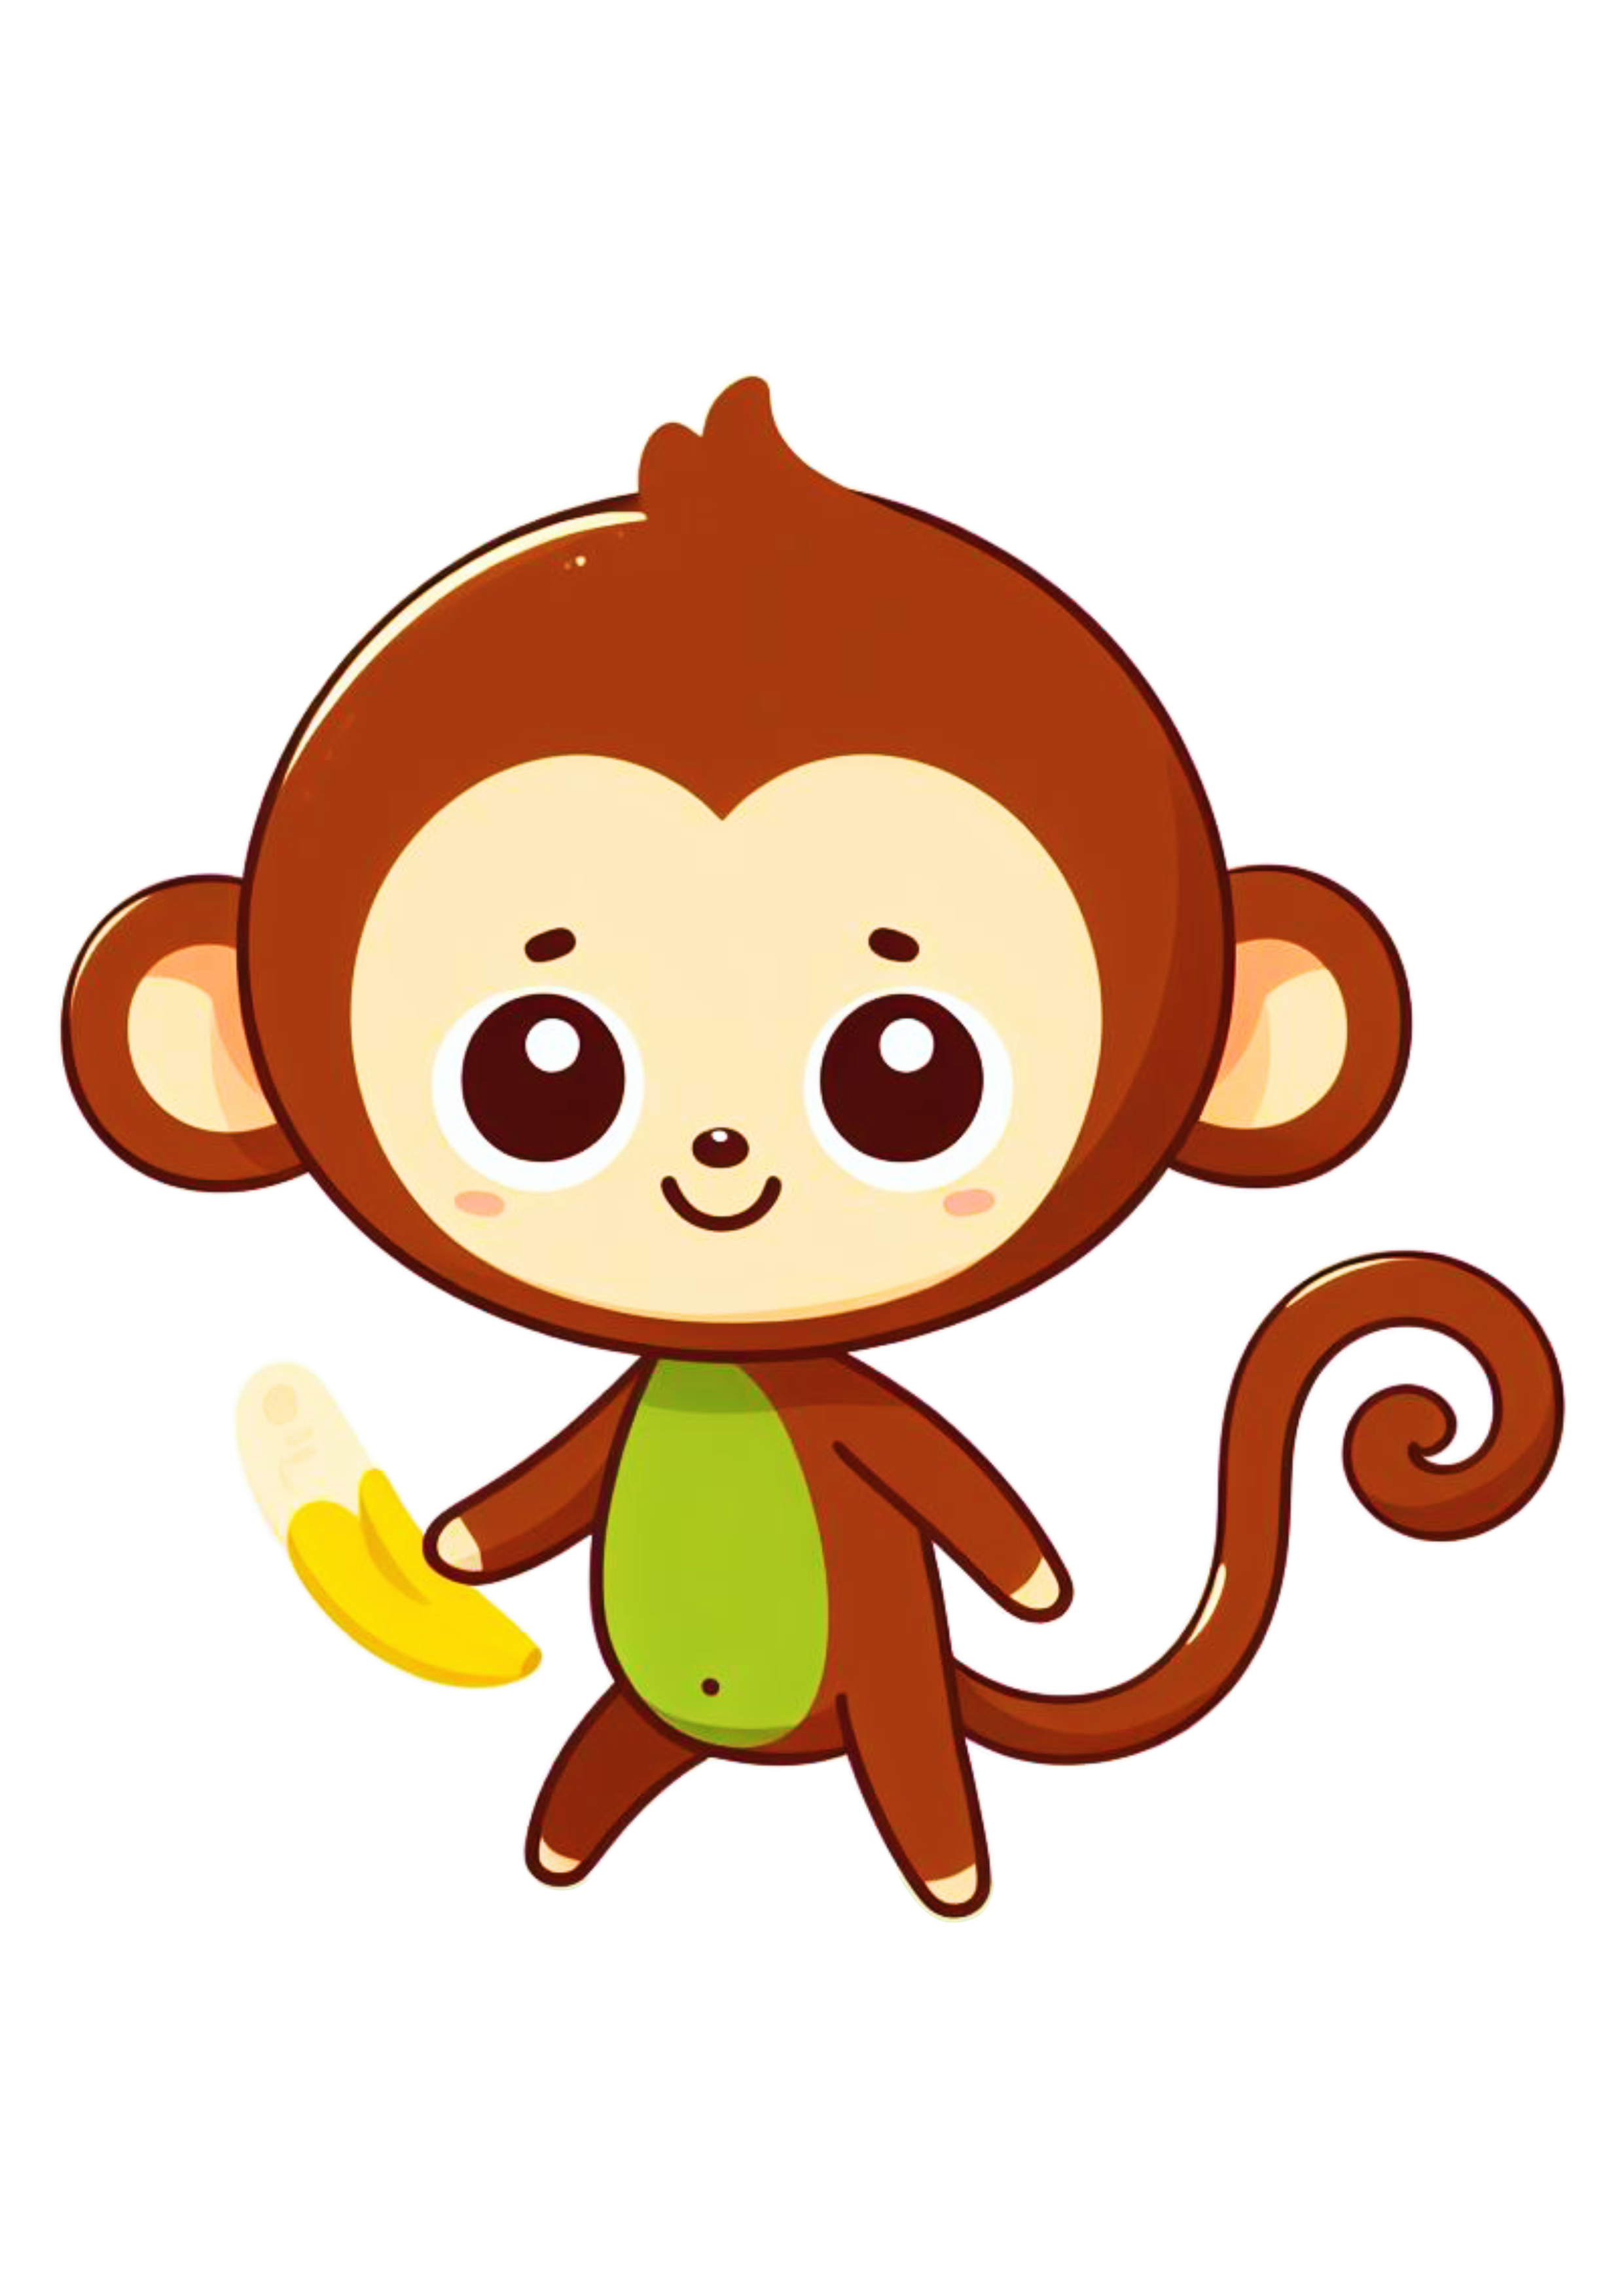 Macaco png